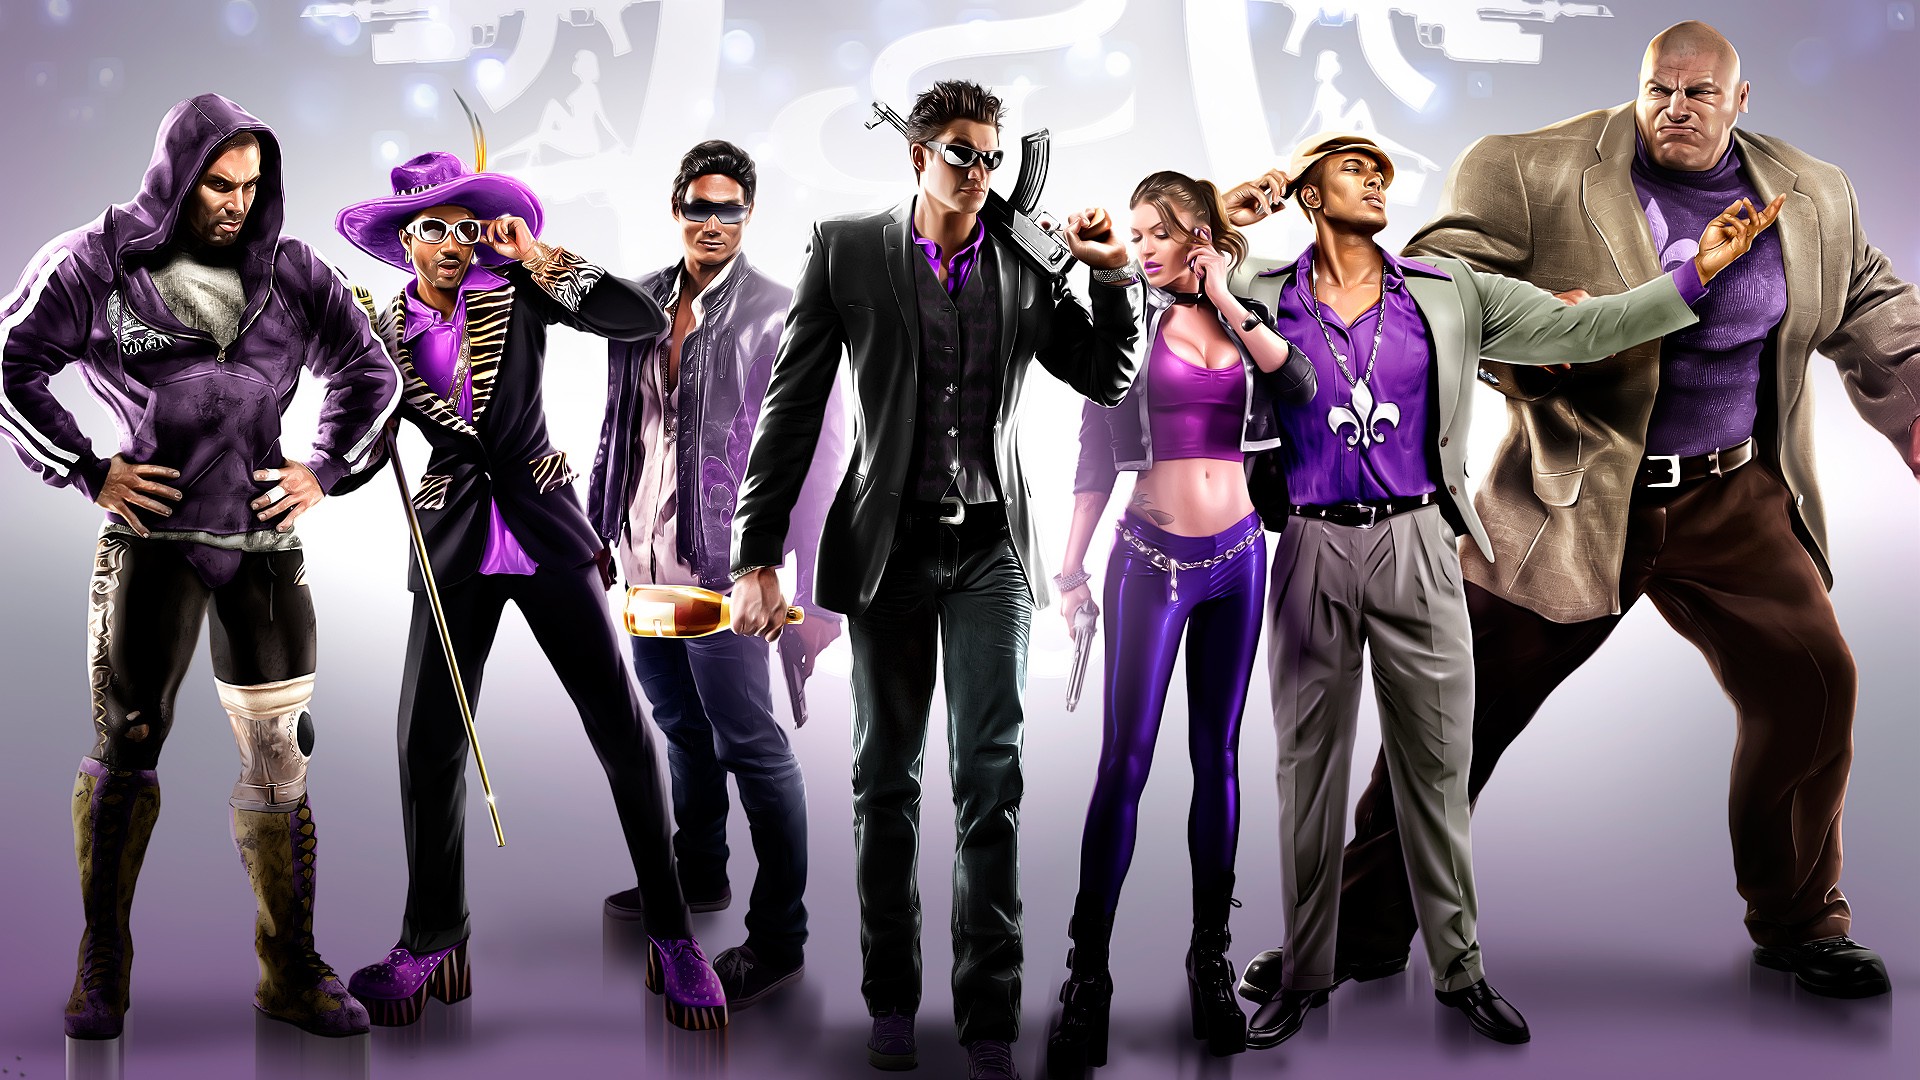 download saint row ps5 for free